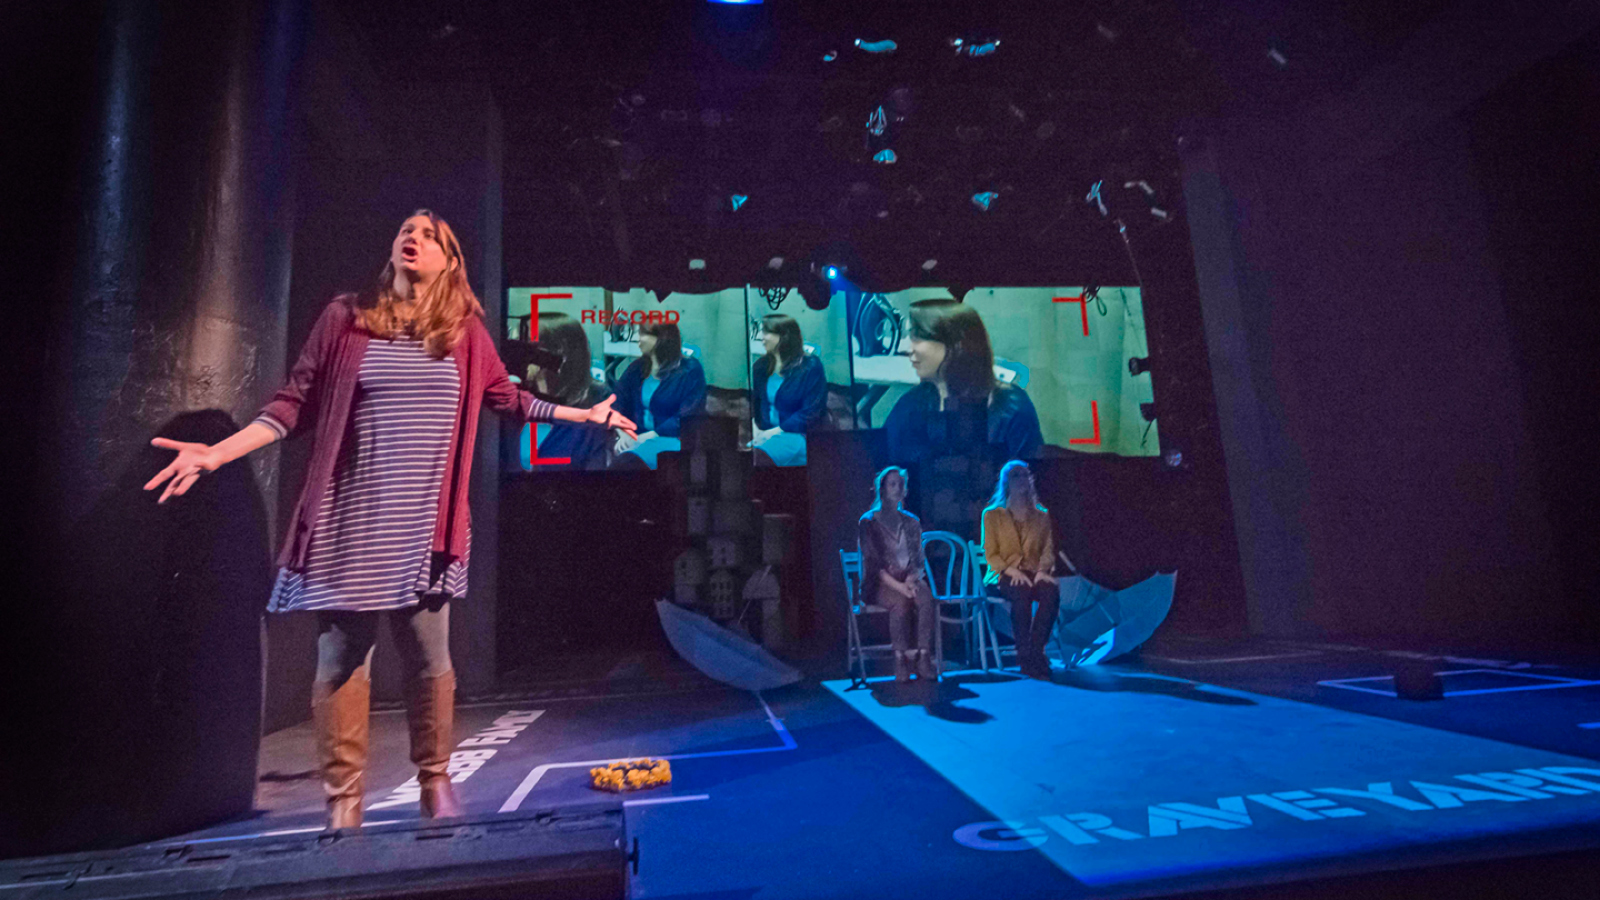 Characters in "Ripe Frenzy" a play by UMD assistant professor of theatre Jennifer Barclay, on stage at New Repertory Theatre in Boston.